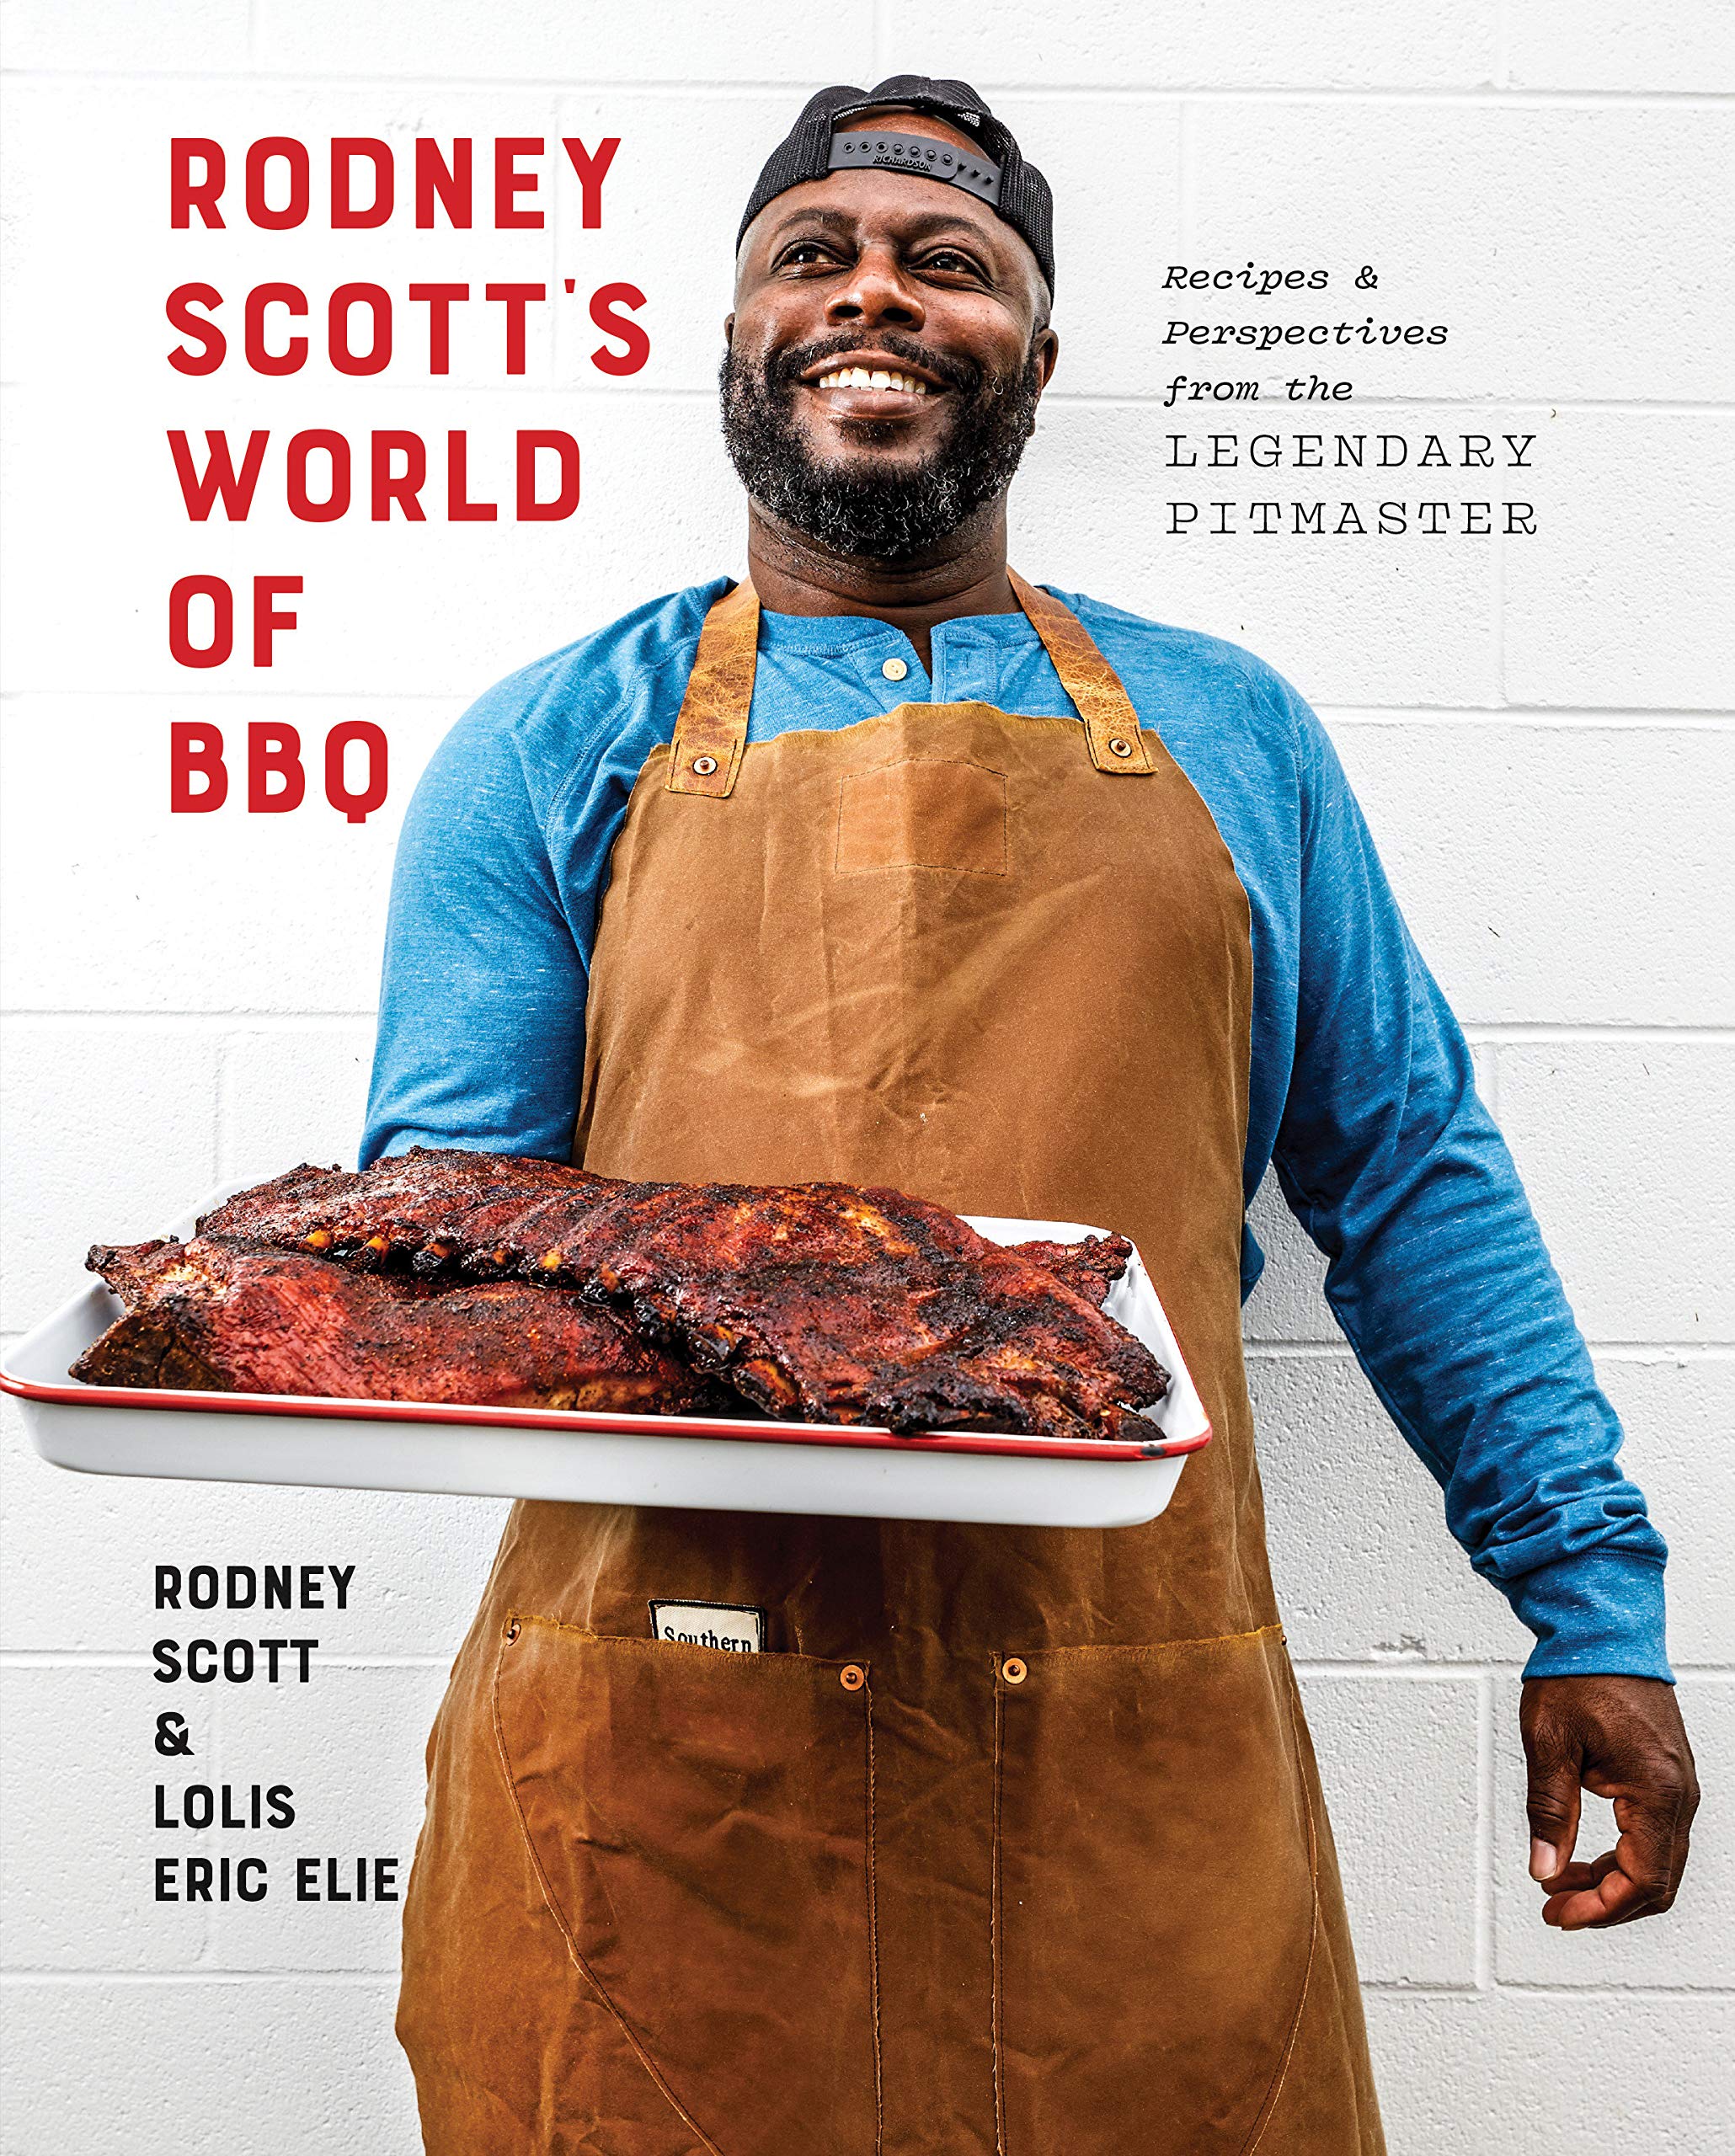 Cookbook Gifts for Father's Day Get 3 for the price of 2: Rodney Scott's World of BBQ $15.67, Cocktail Codex $22.49 & More + FS w/ Prime or $25+